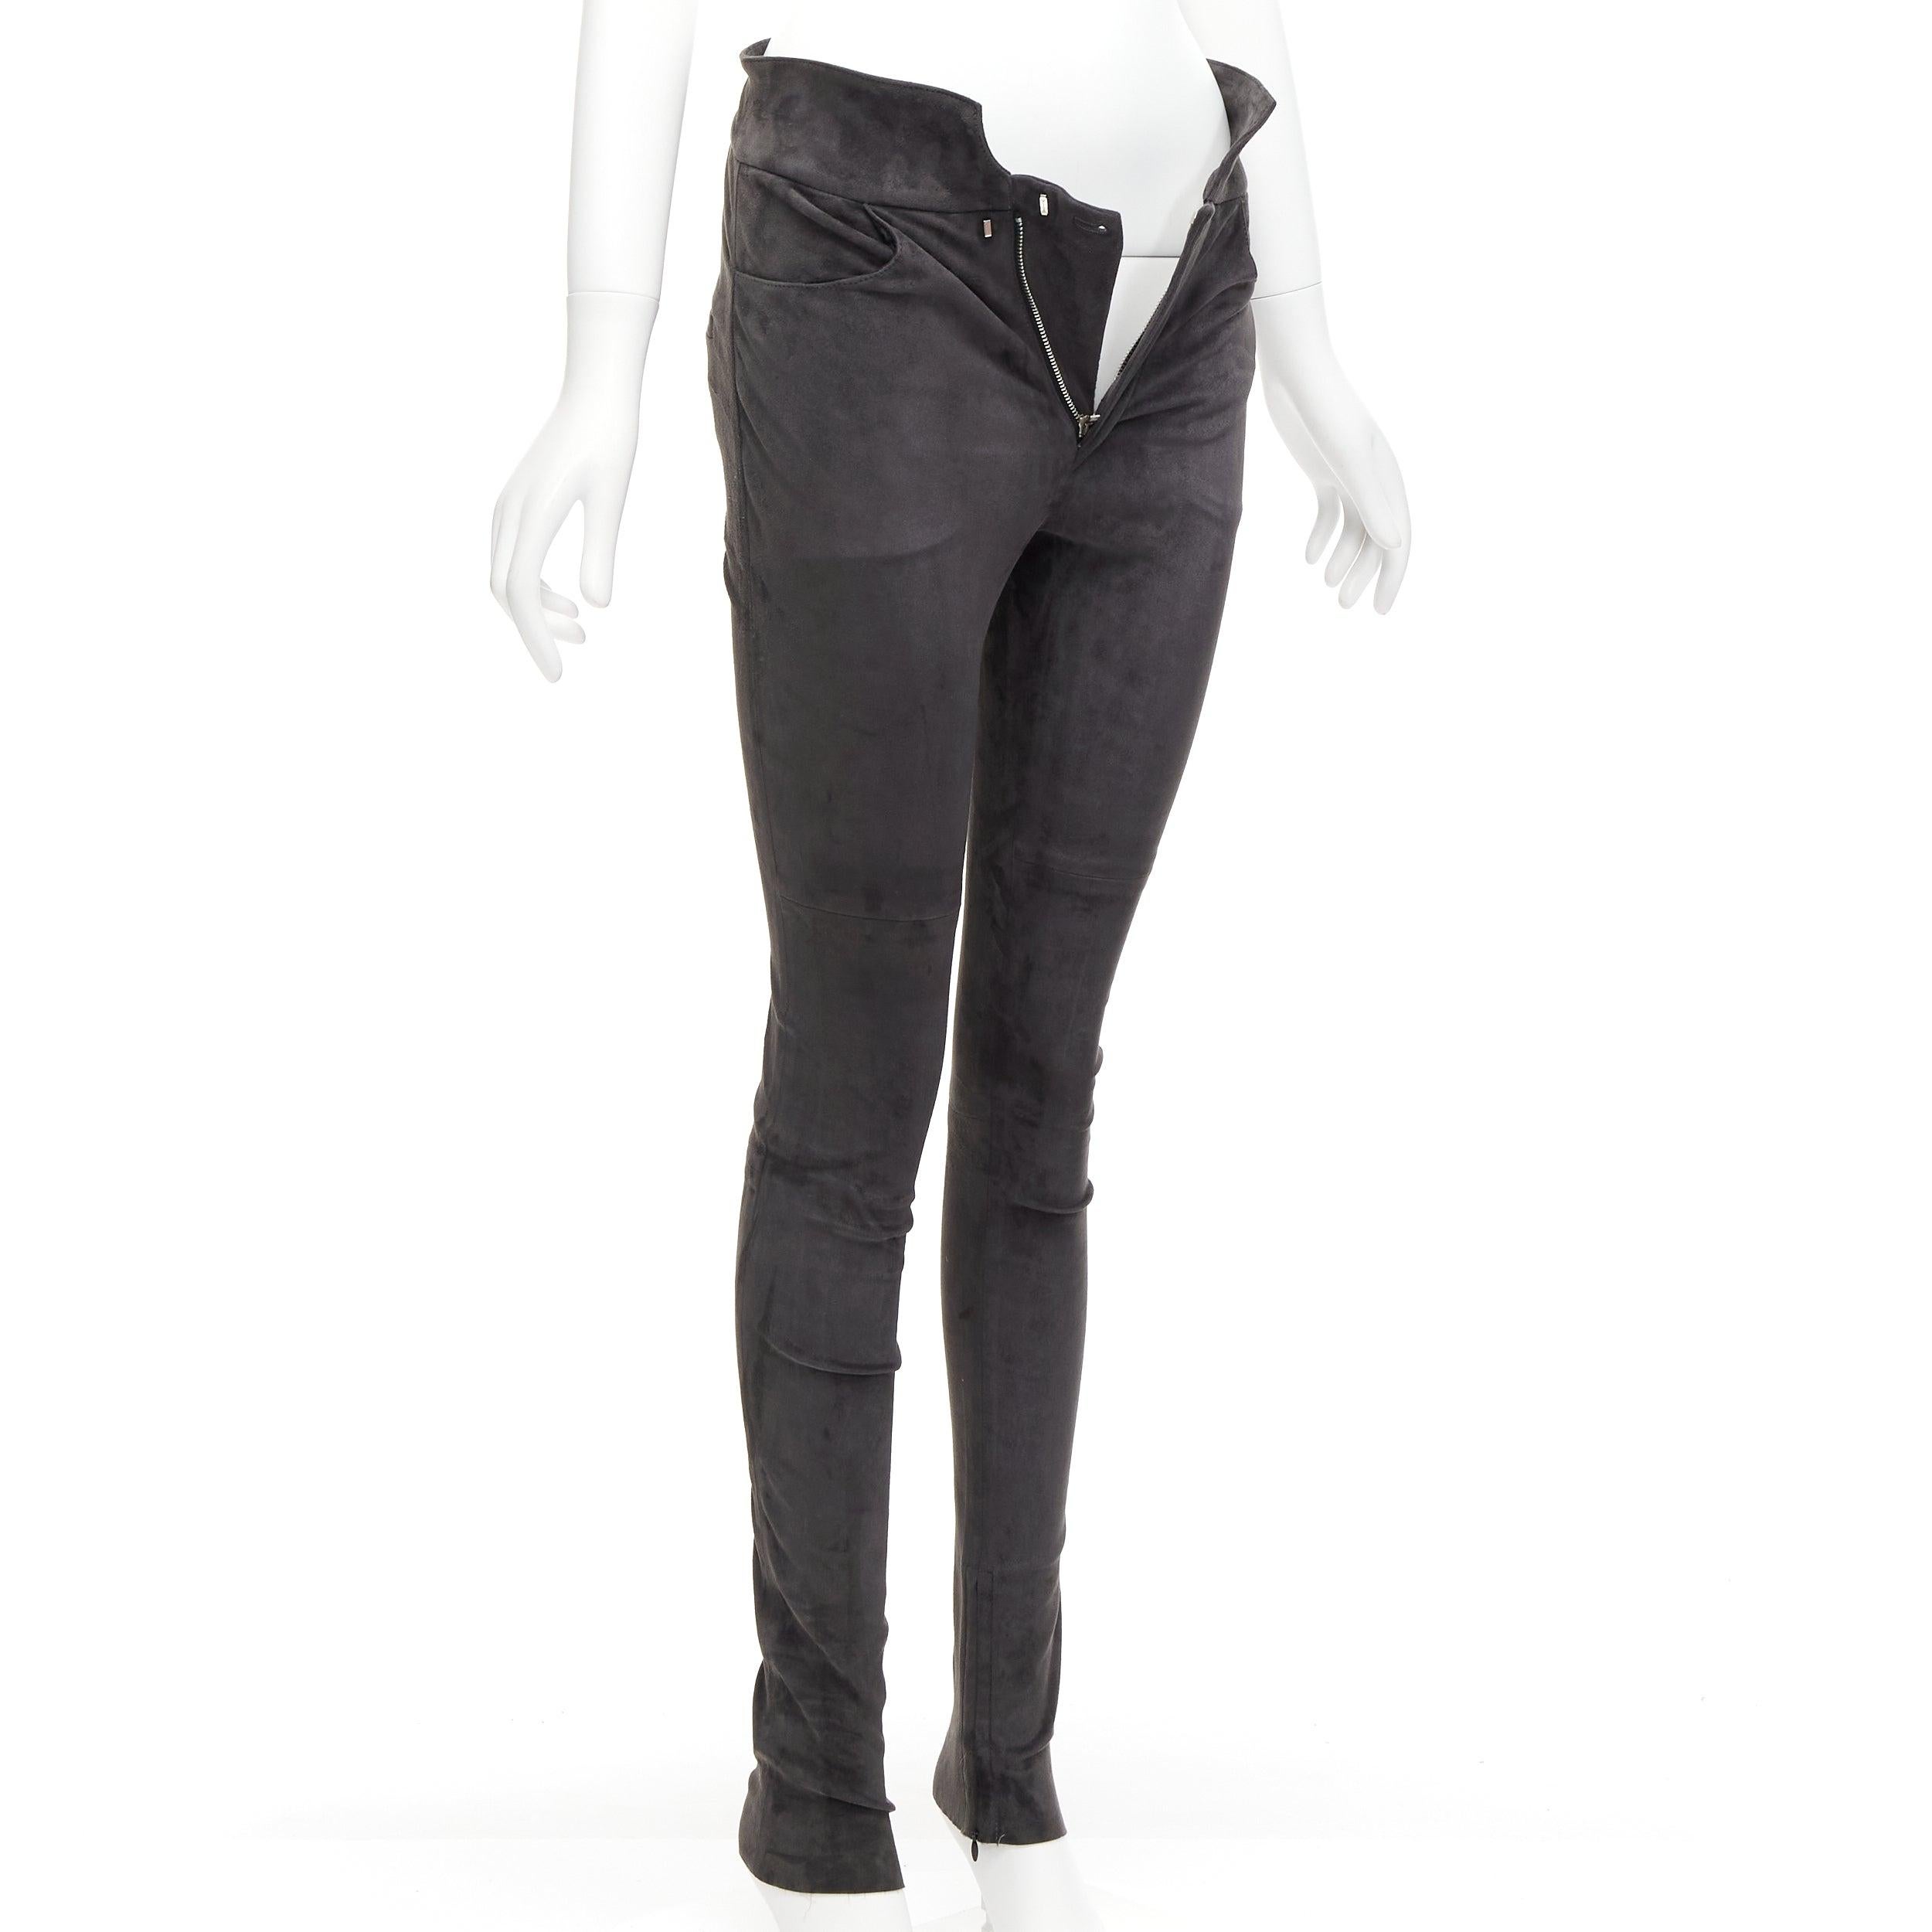 ISABEL MARANT 100% lambskin suede leather grey high waisted skinny pants FR36 S
Reference: NKLL/A00056
Brand: Isabel Marant
Material: Lambskin Leather
Color: Grey
Pattern: Solid
Closure: Zip Fly
Lining: Black Fabric
Extra Details: Back pockets. Raw